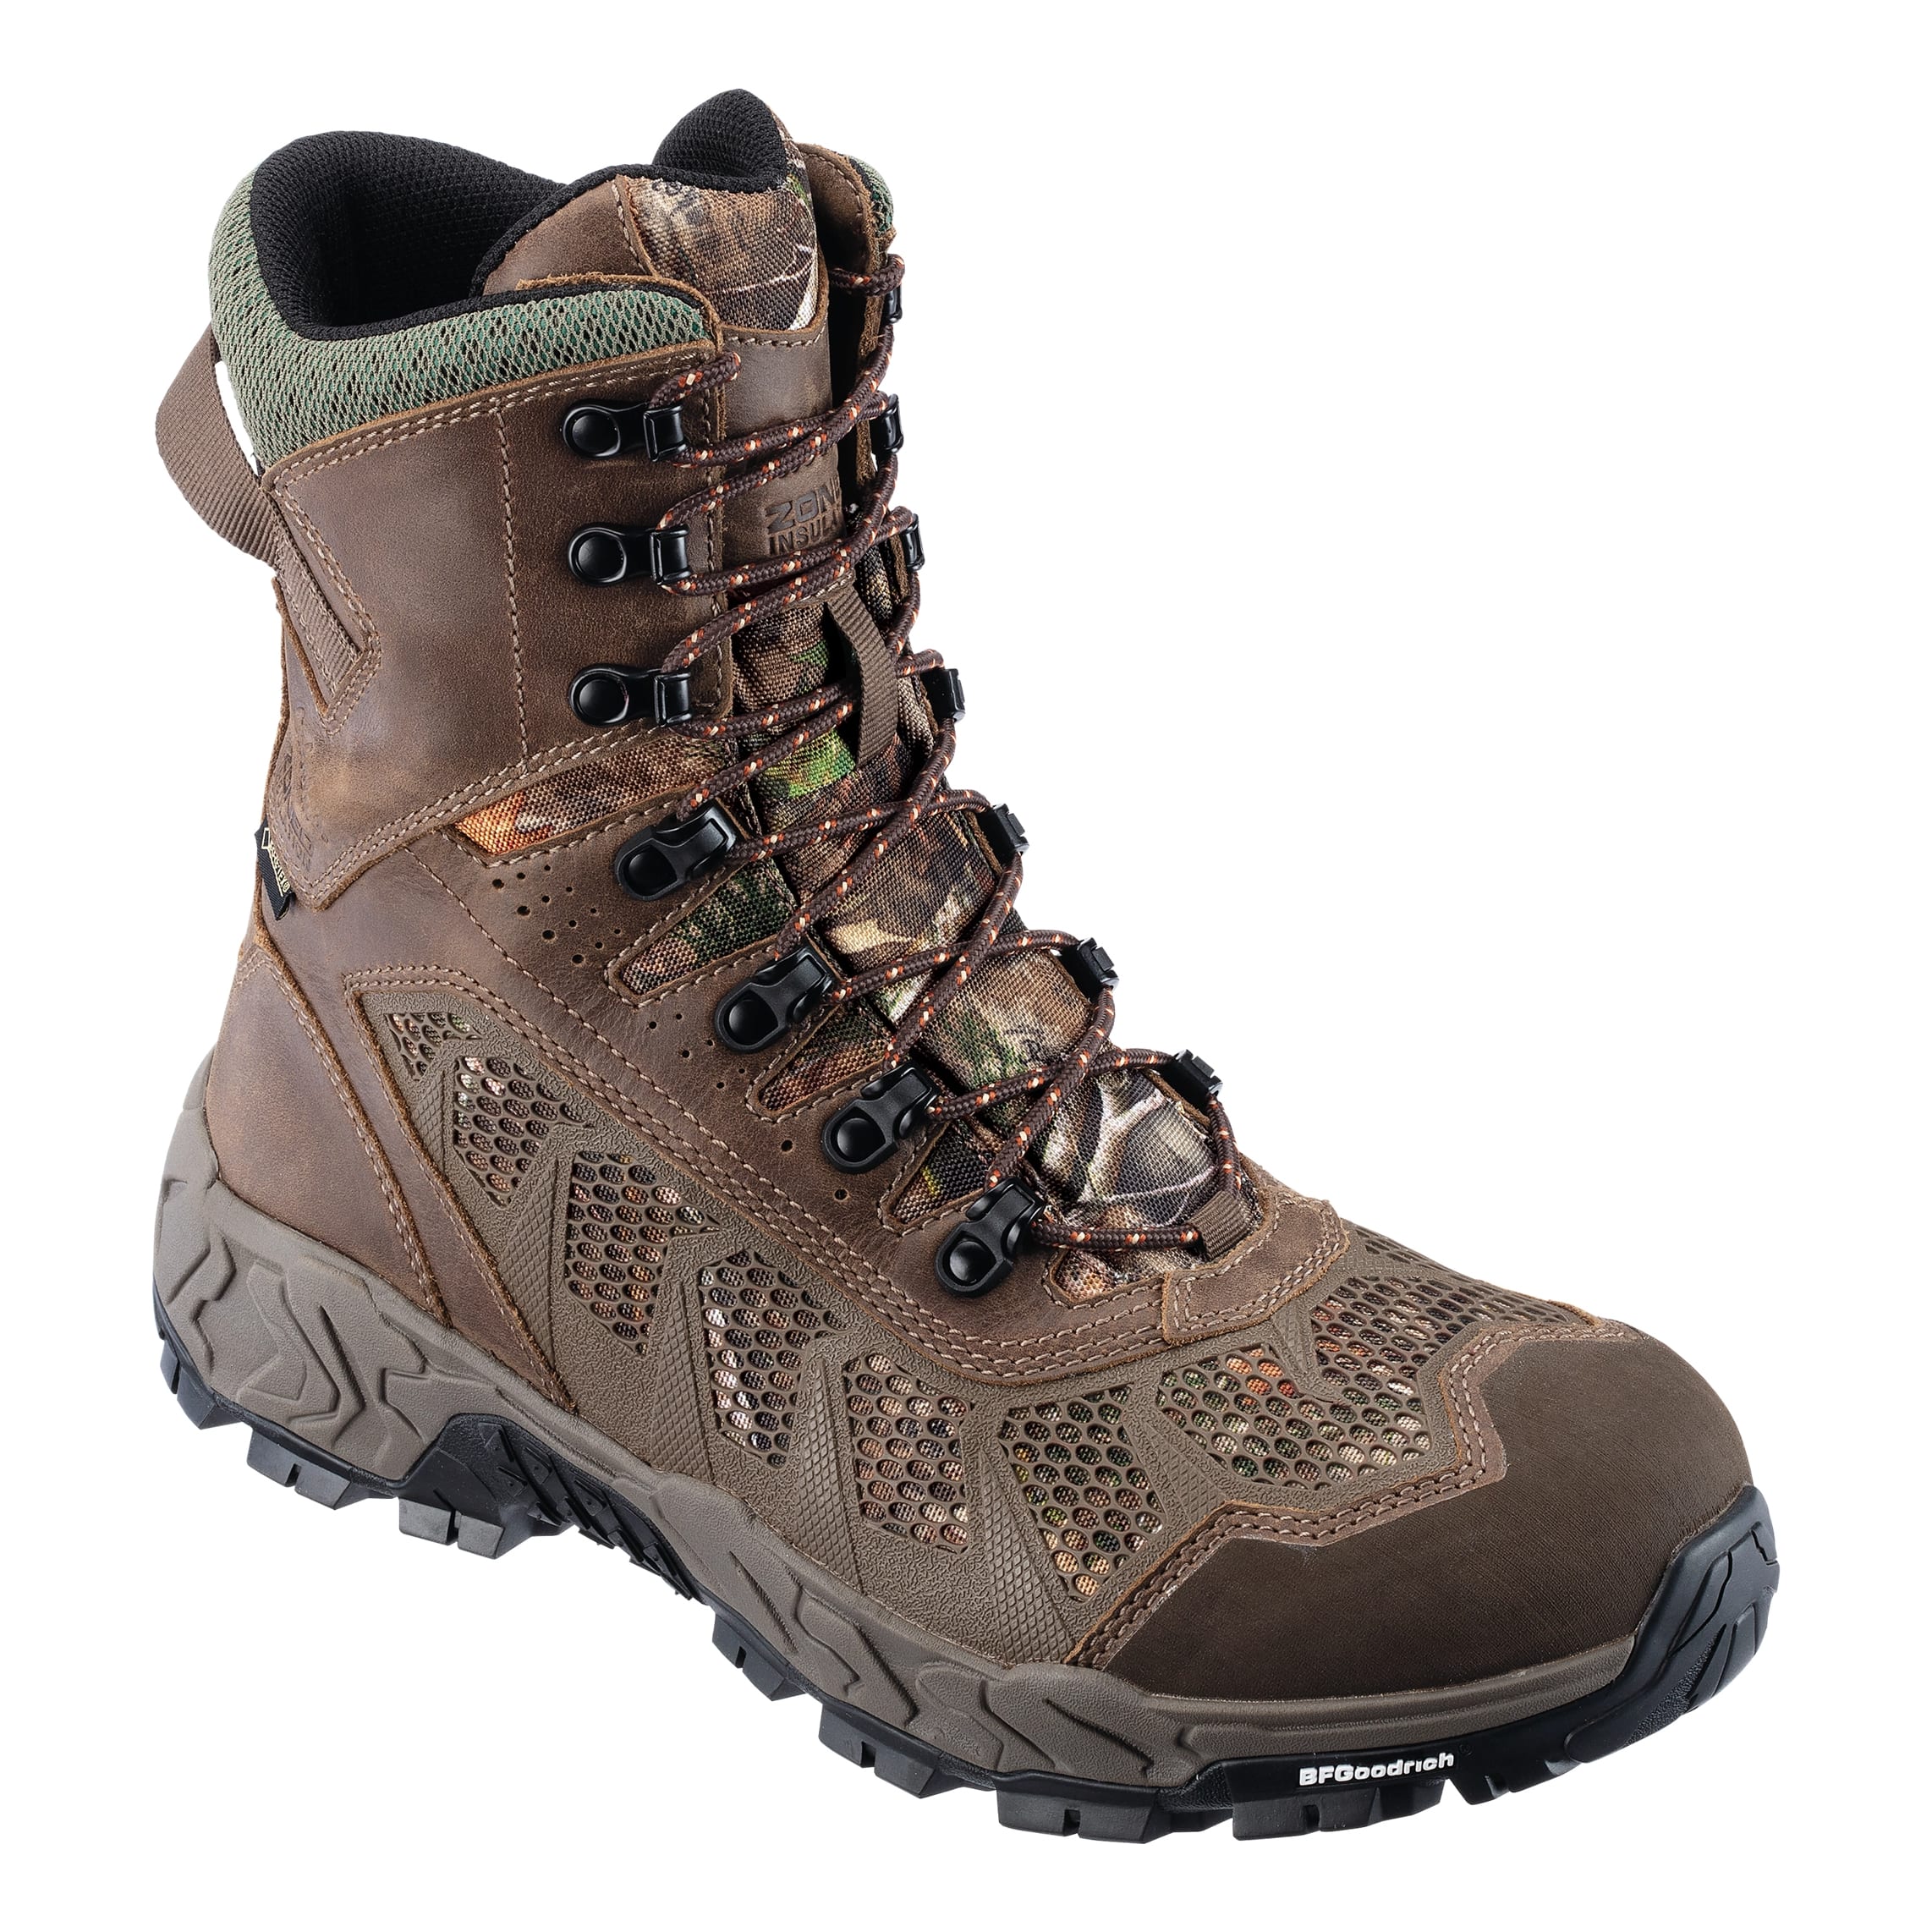 Cabela's Treadfast BOA GORE-TEX Insulated Hunting Boots For Men Cabela ...